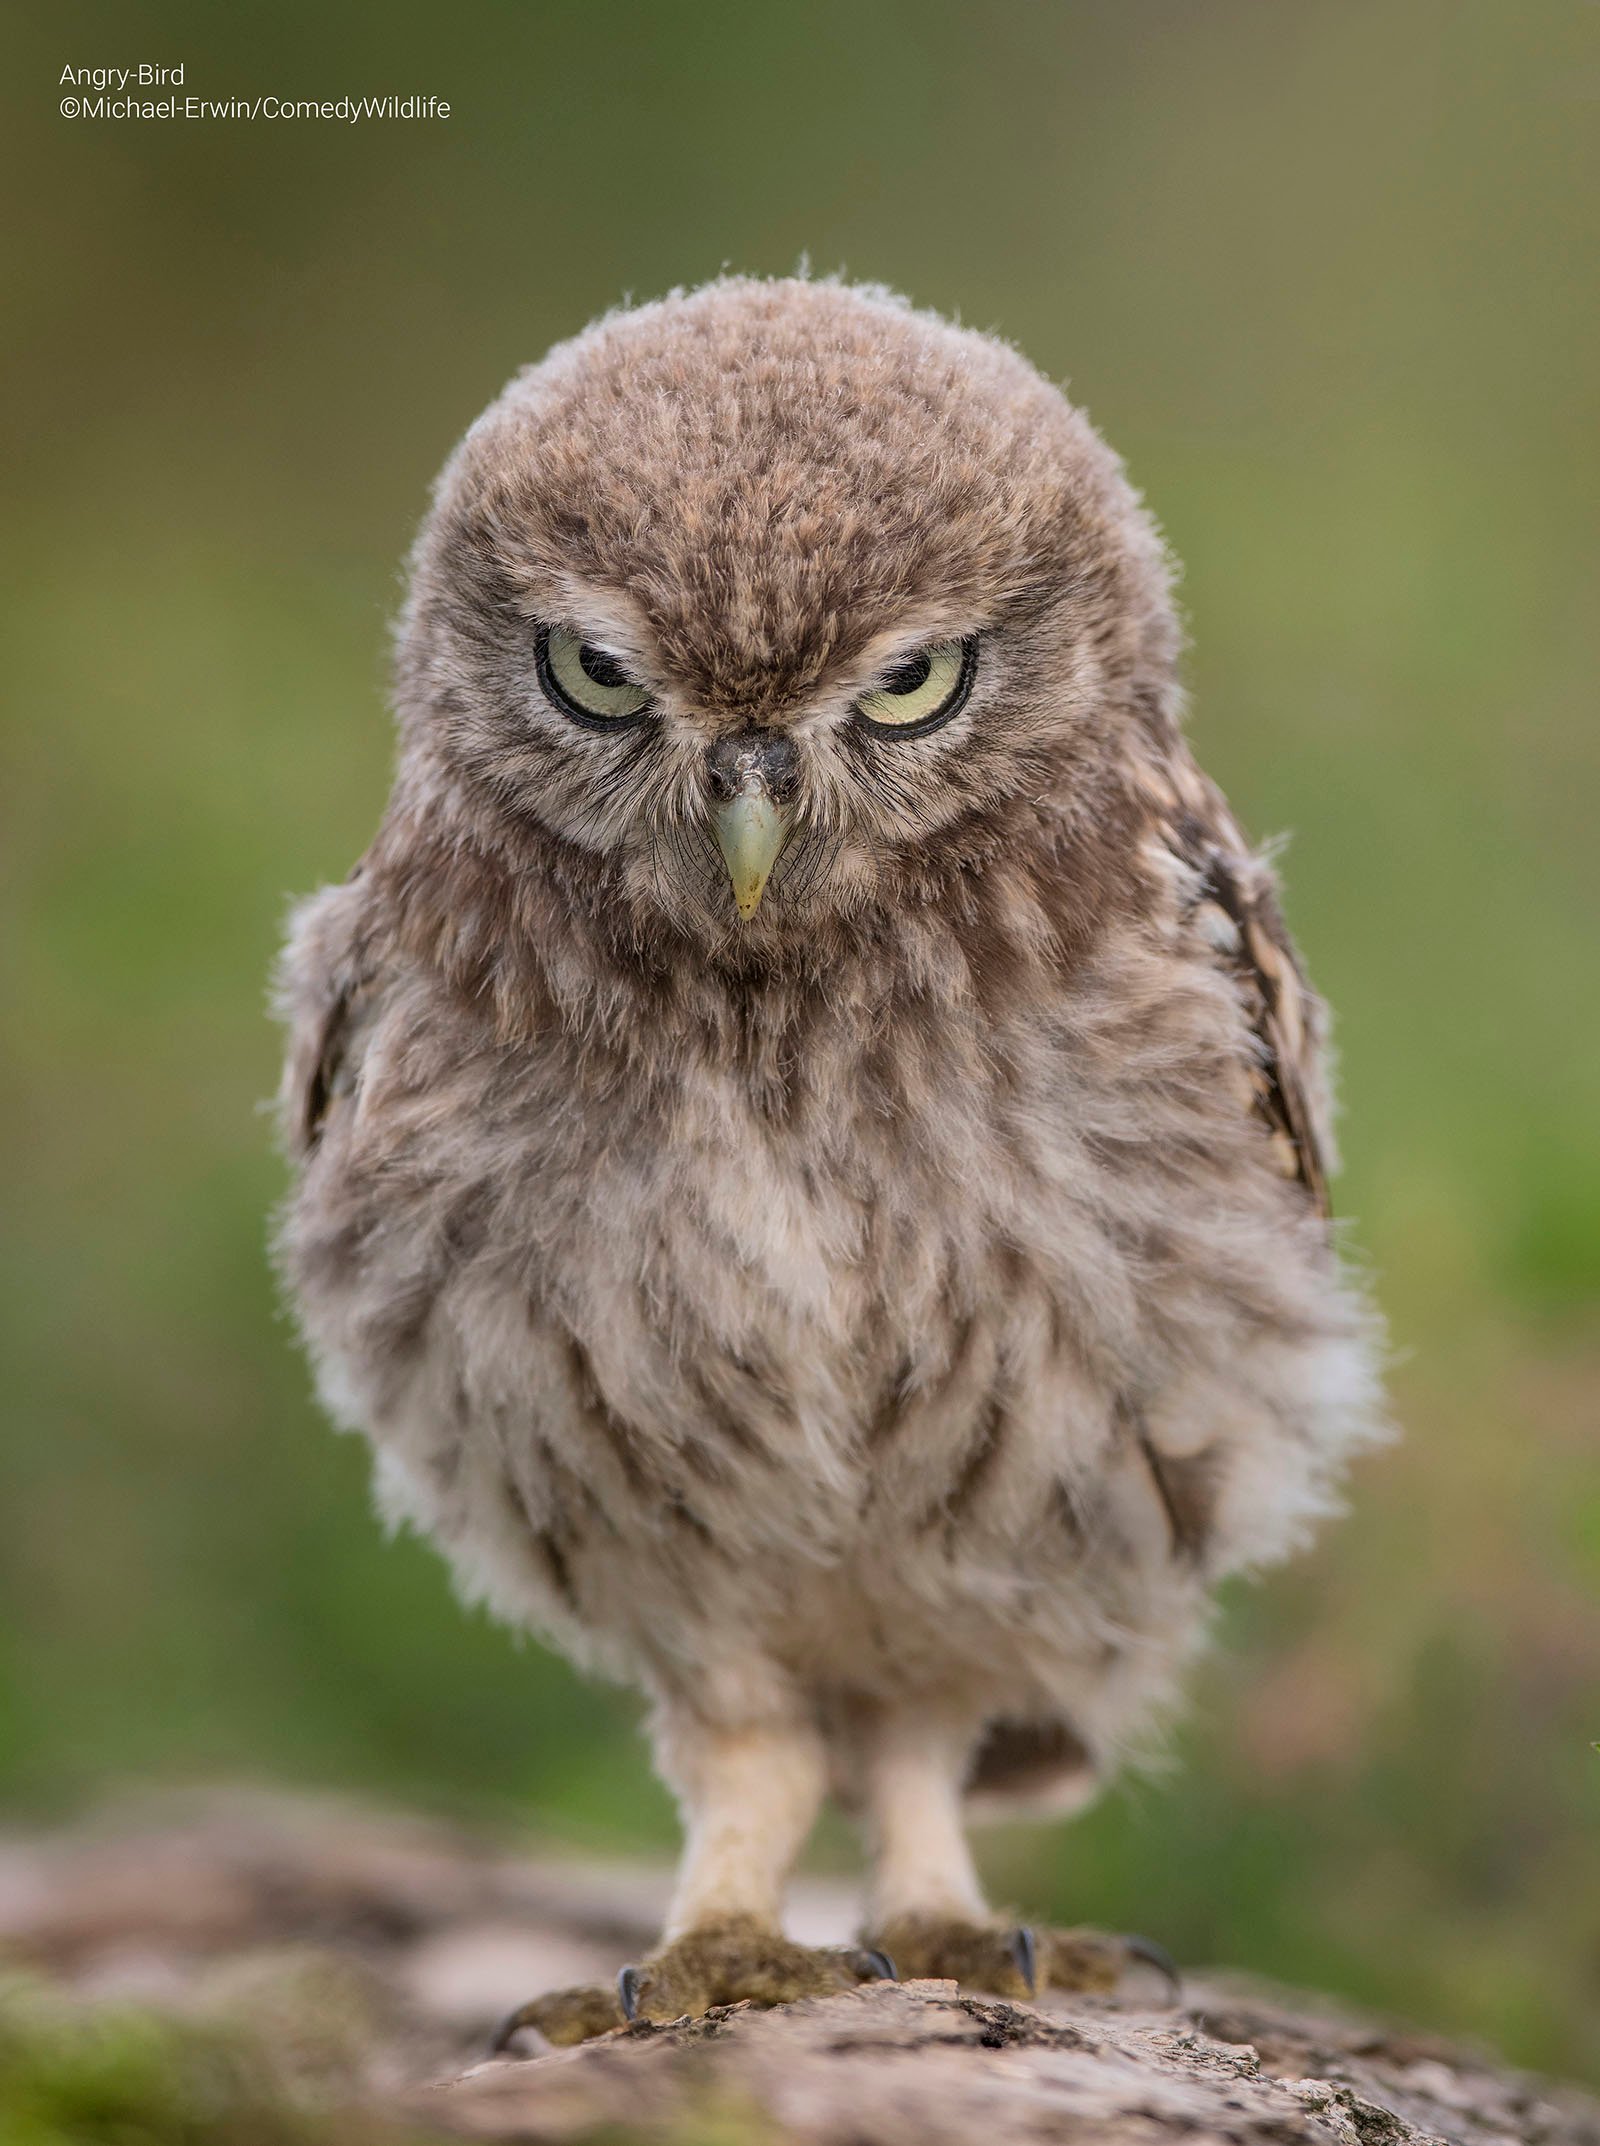 An owl looks like it's making a grumpy face at the camera.